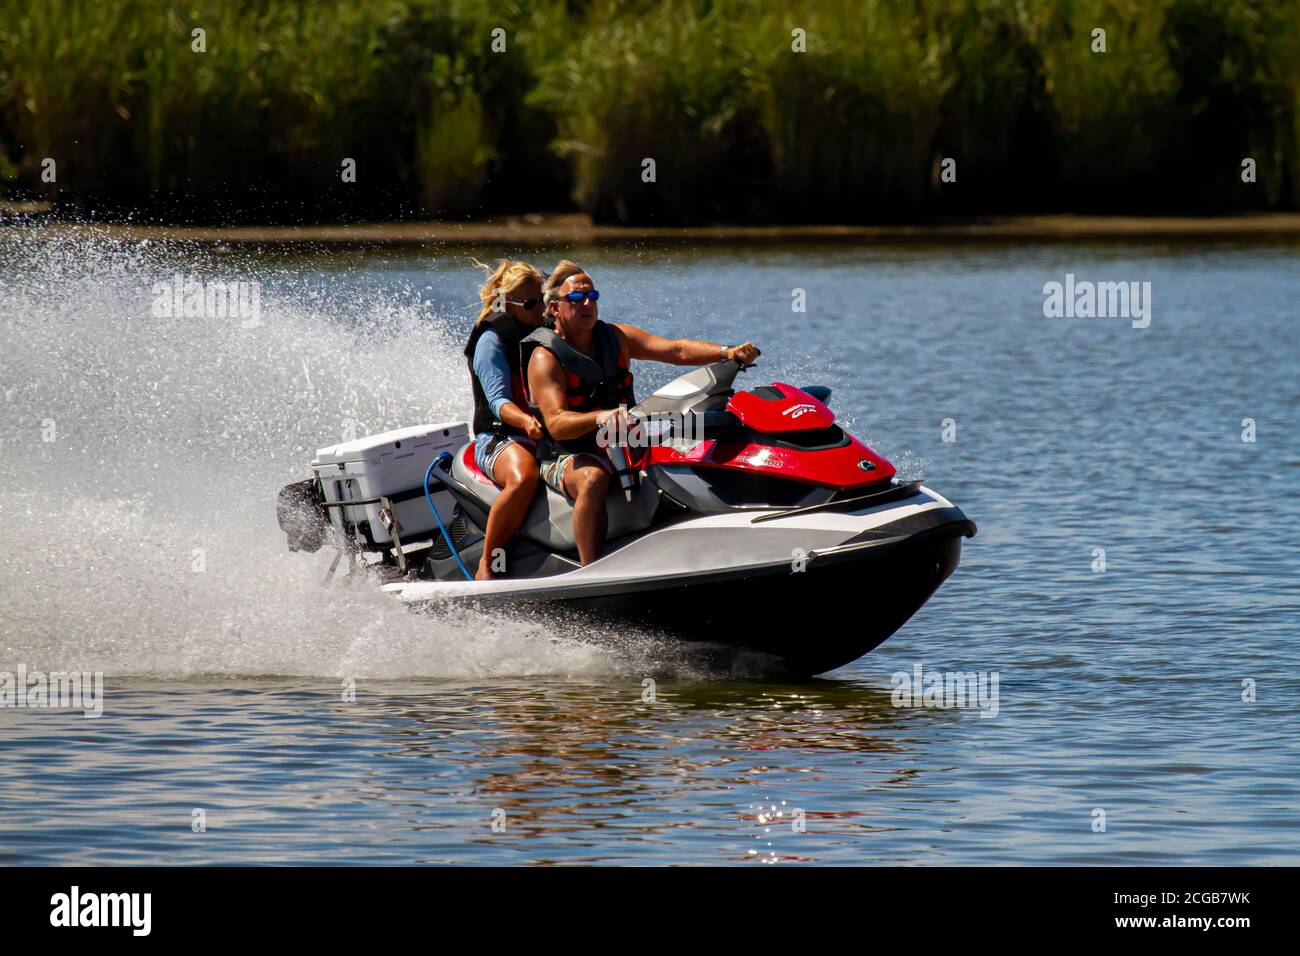 Eastern Neck Island, MD, USA 08/30/2020: A middle aged caucasian couple wearing life vests are on a Sea Doo GTX personal water craft. They move really Stock Photo